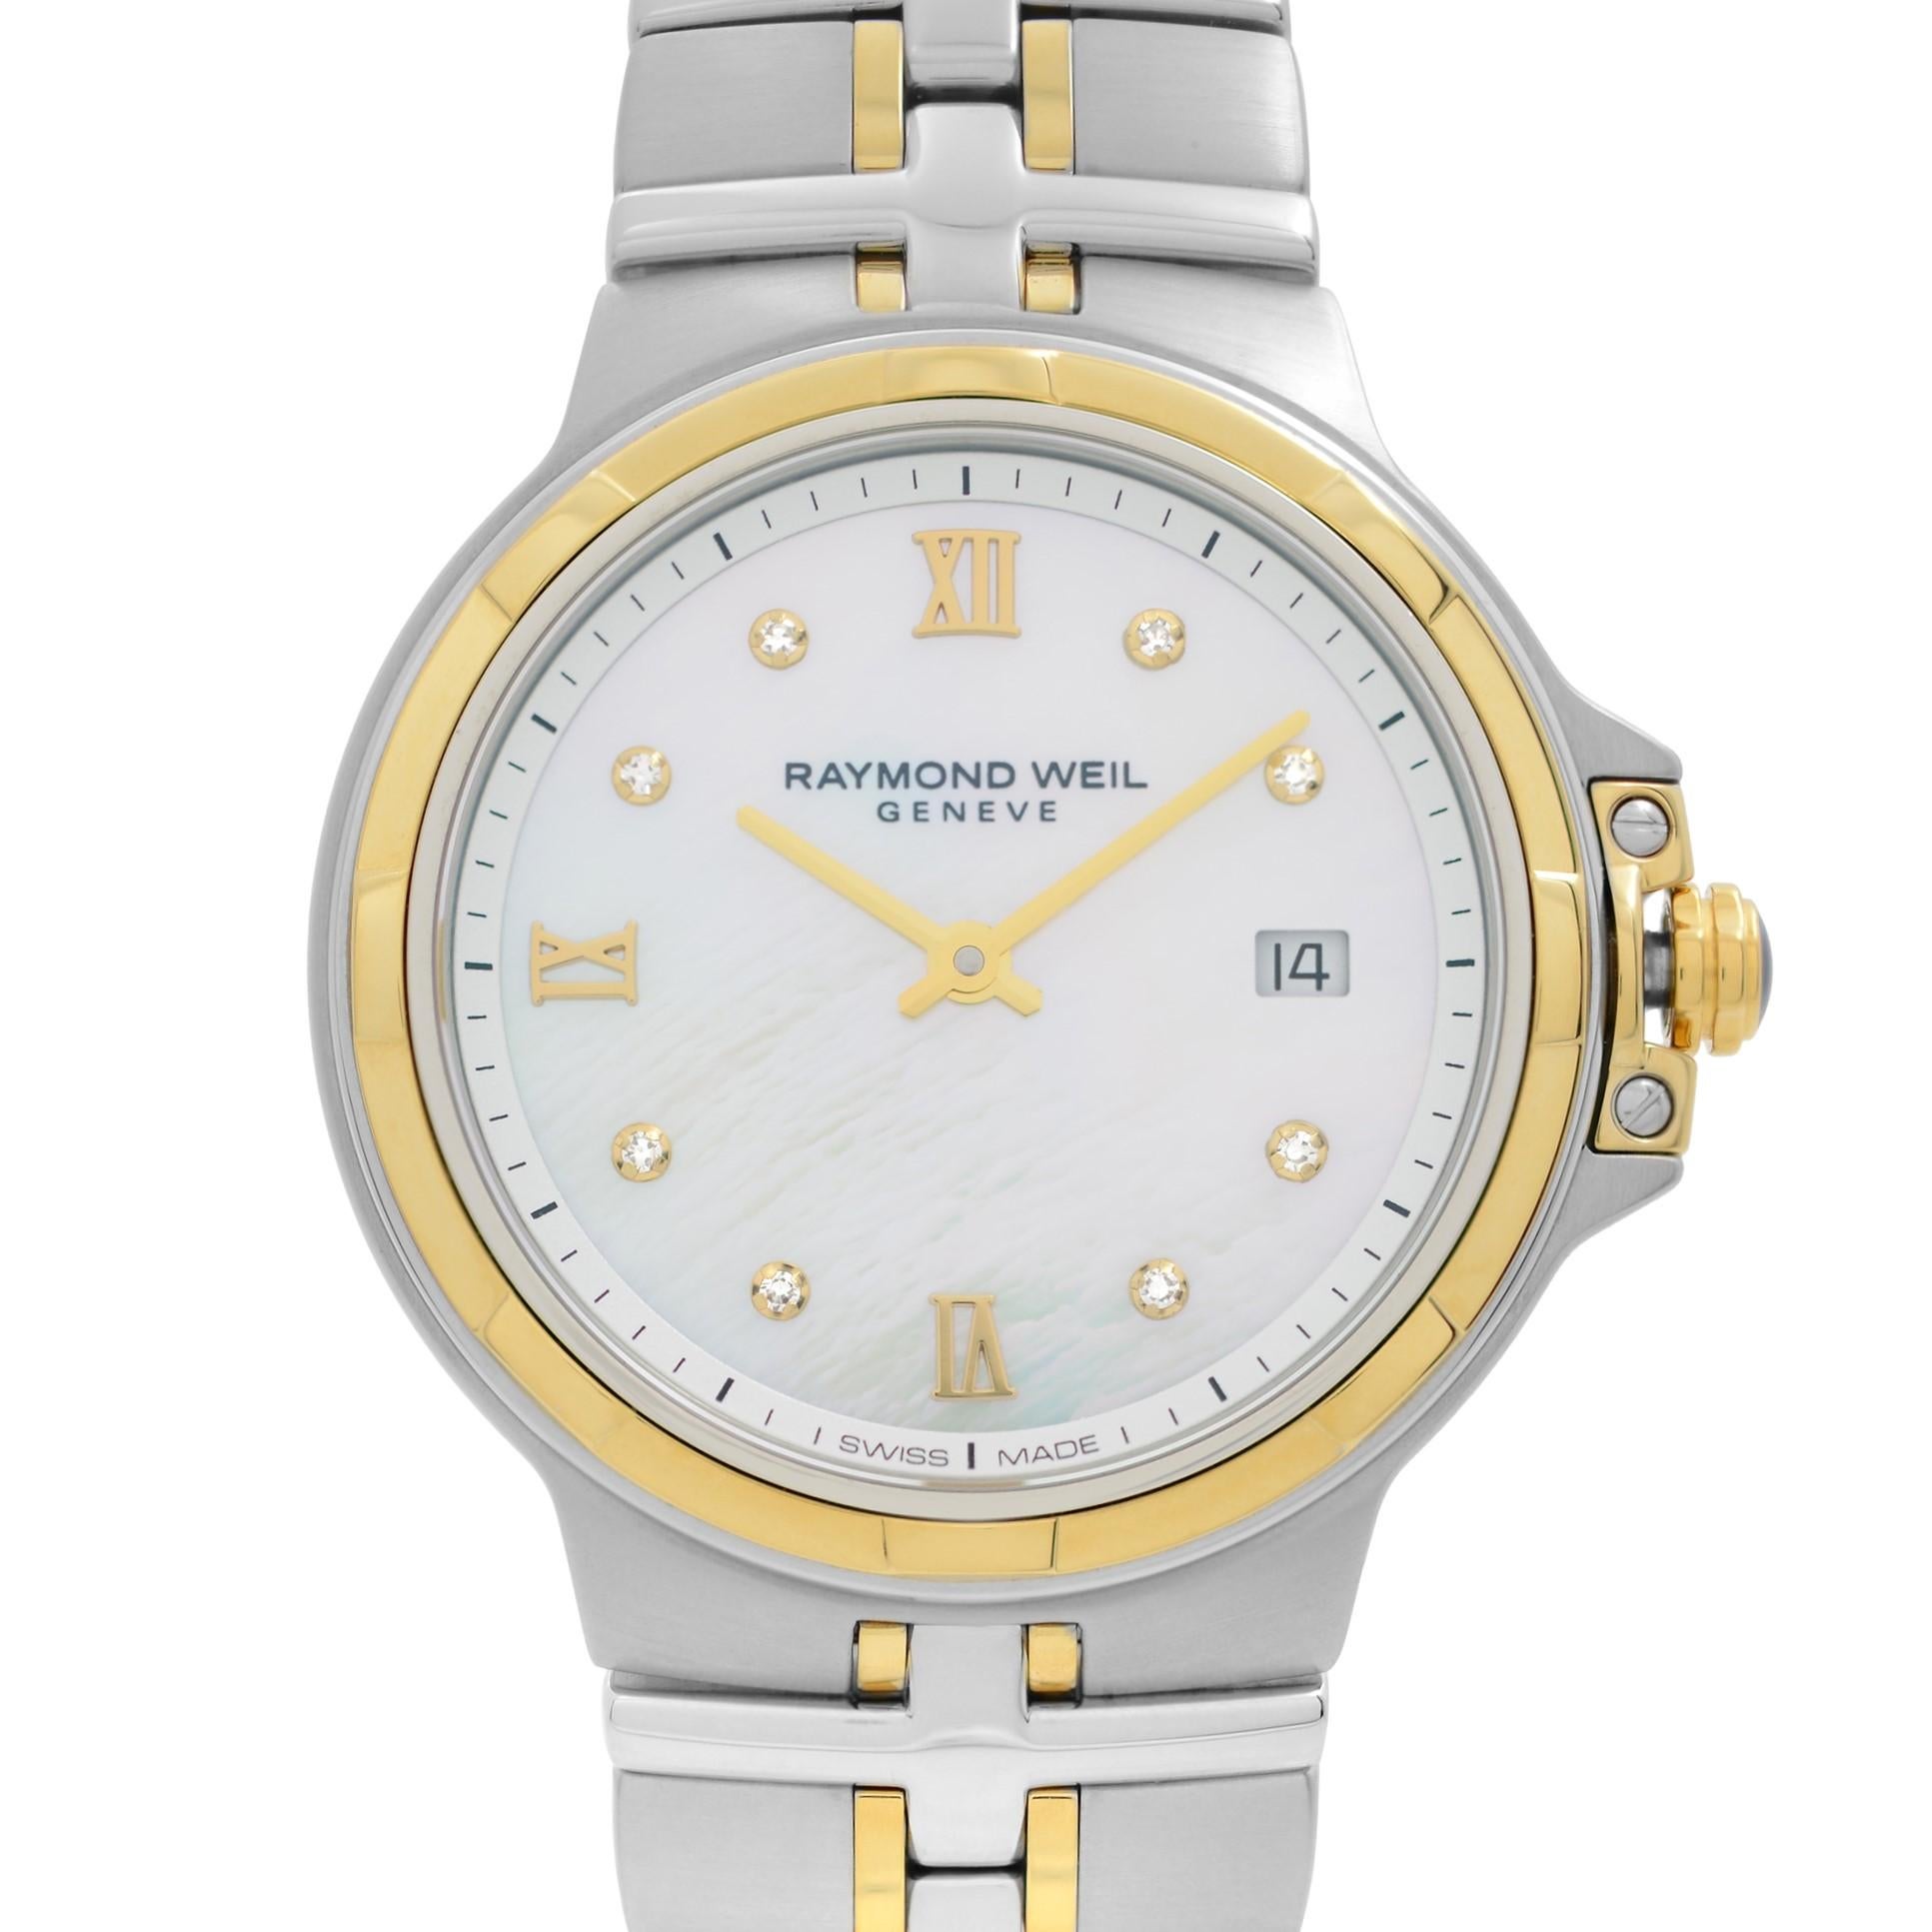 Unworn Store Display Model Raymond Weil Parsifal Steel Diamond White MOP Dial Ladies Watch 5180-STP-00995. This Beautiful Timepiece Features: Stainless Steel Case with a Two-Tone (Silver-Tone and Yellow Gold PVD) Stainless Steel Bracelet, Fixed